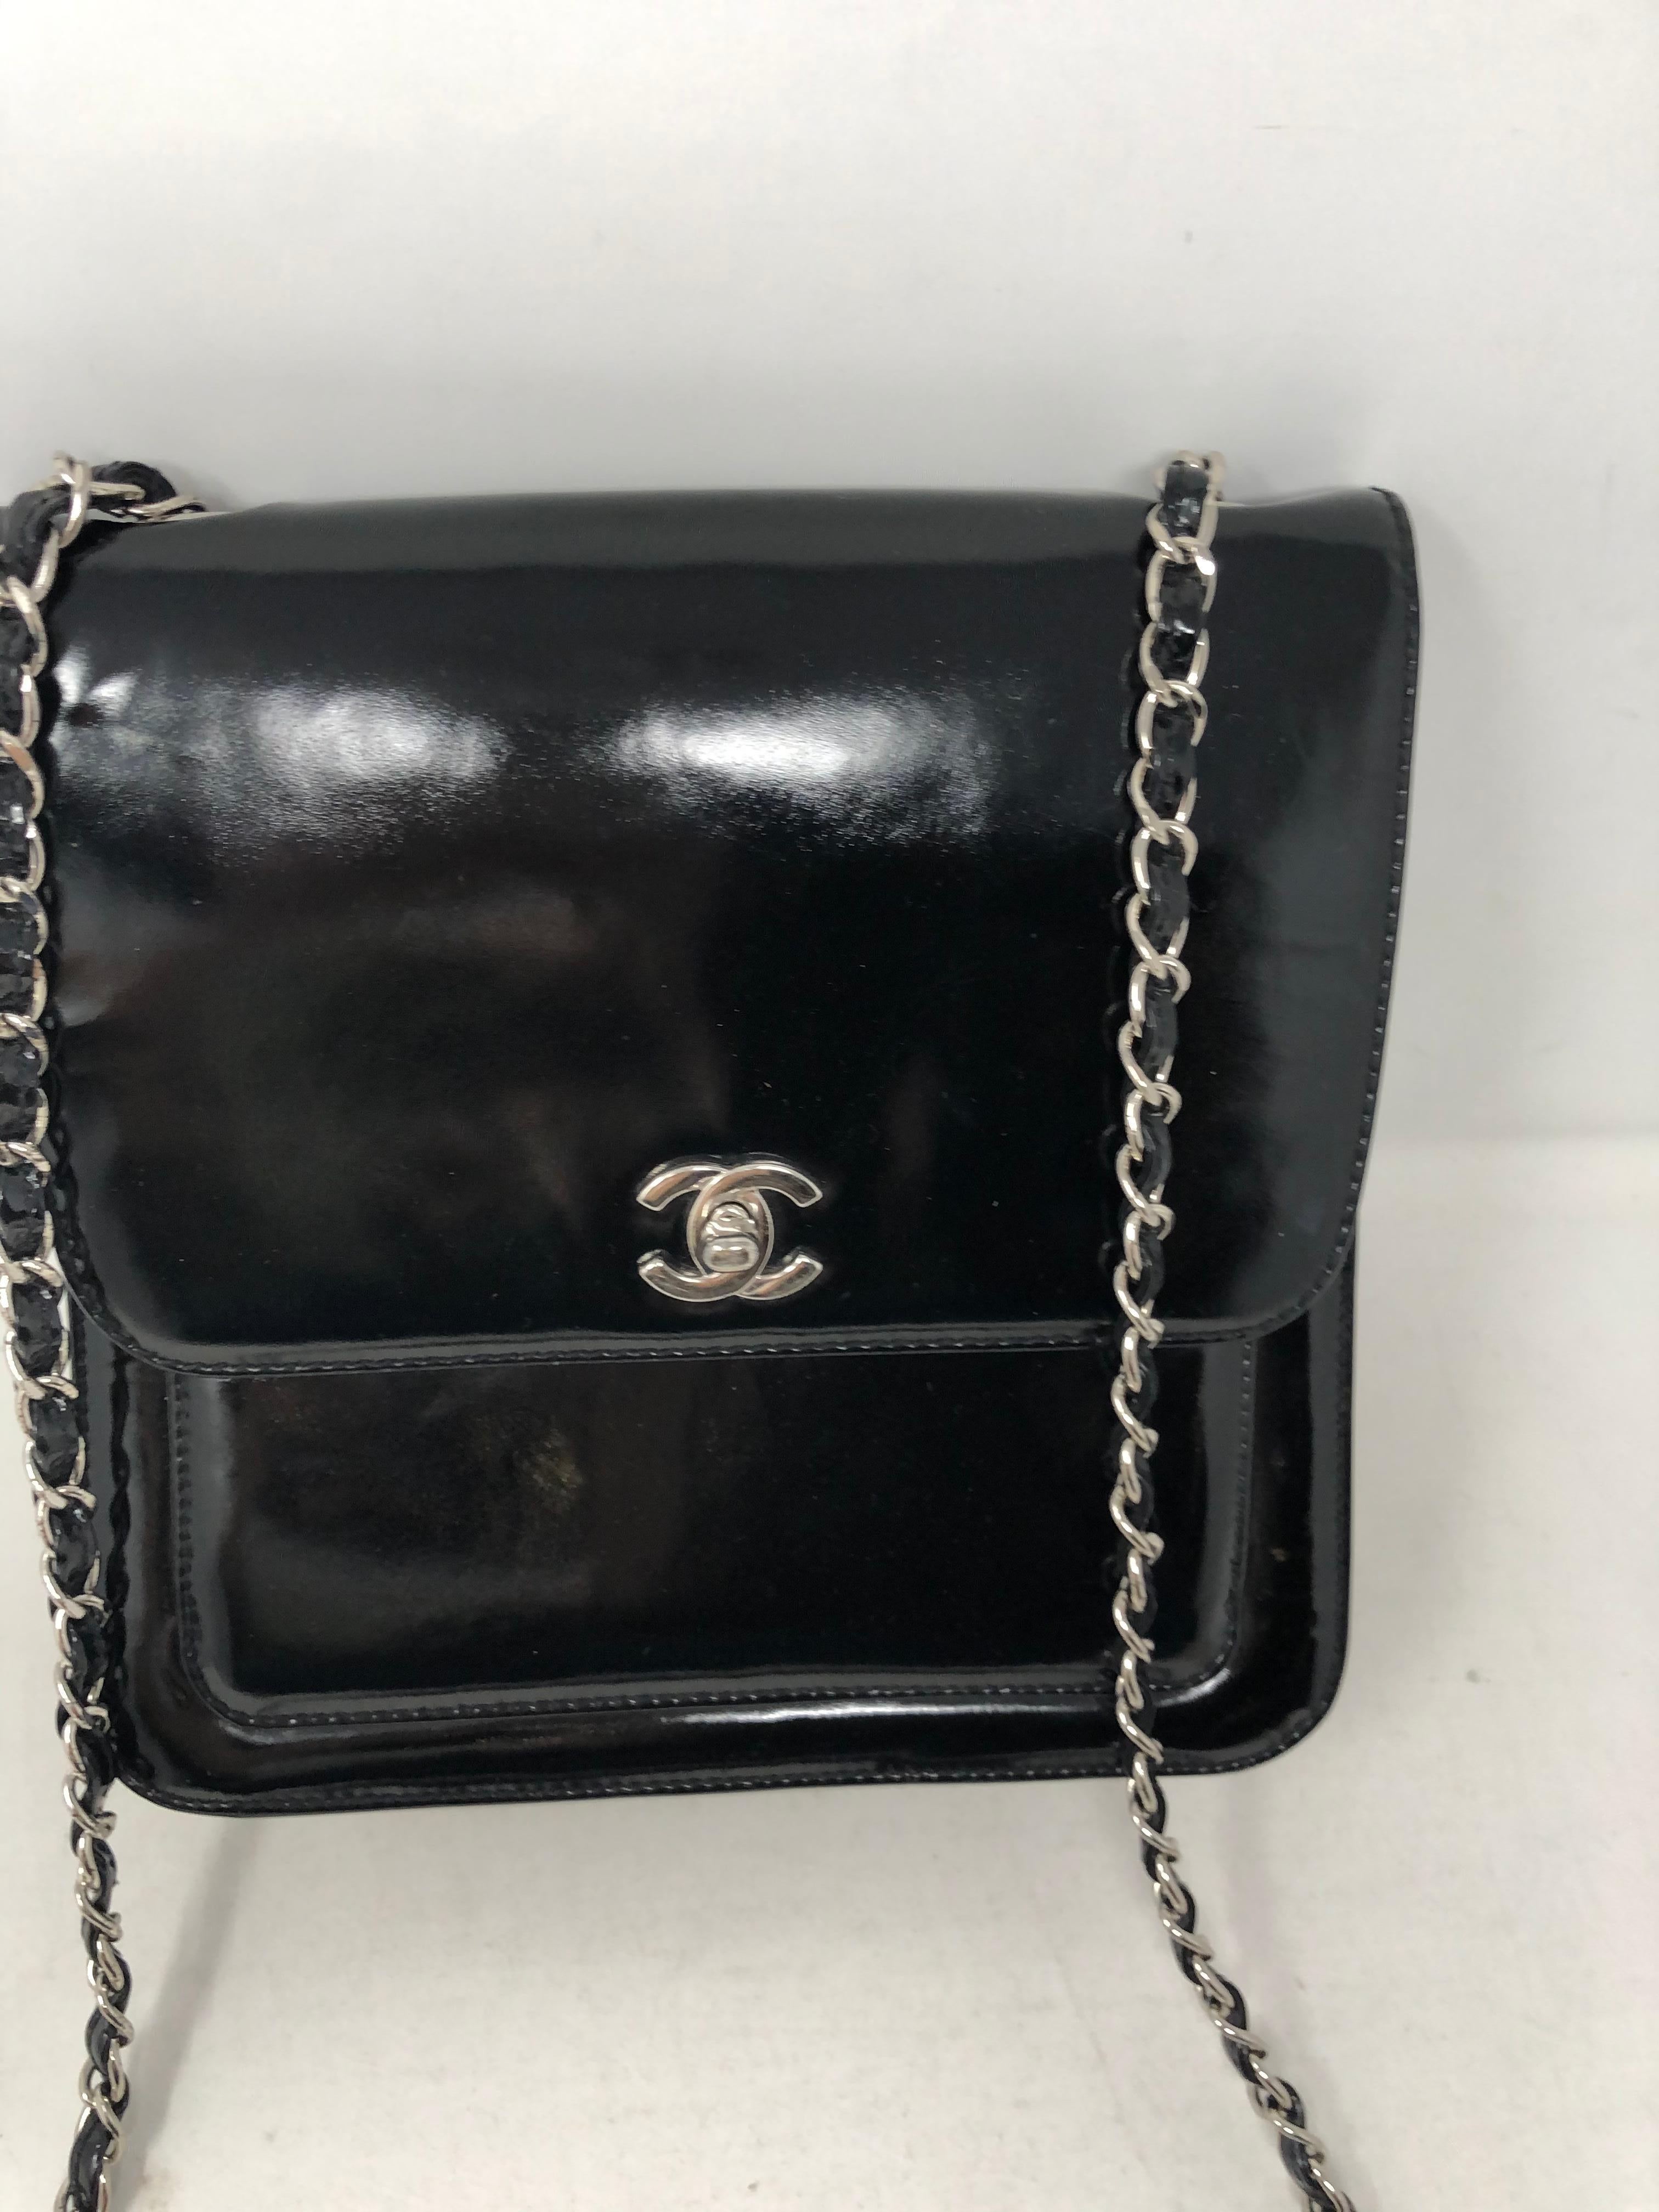 Chanel Patent Leather Crossbody Bag. Silver hardware. Excellent condition. Guaranteed authentic. 